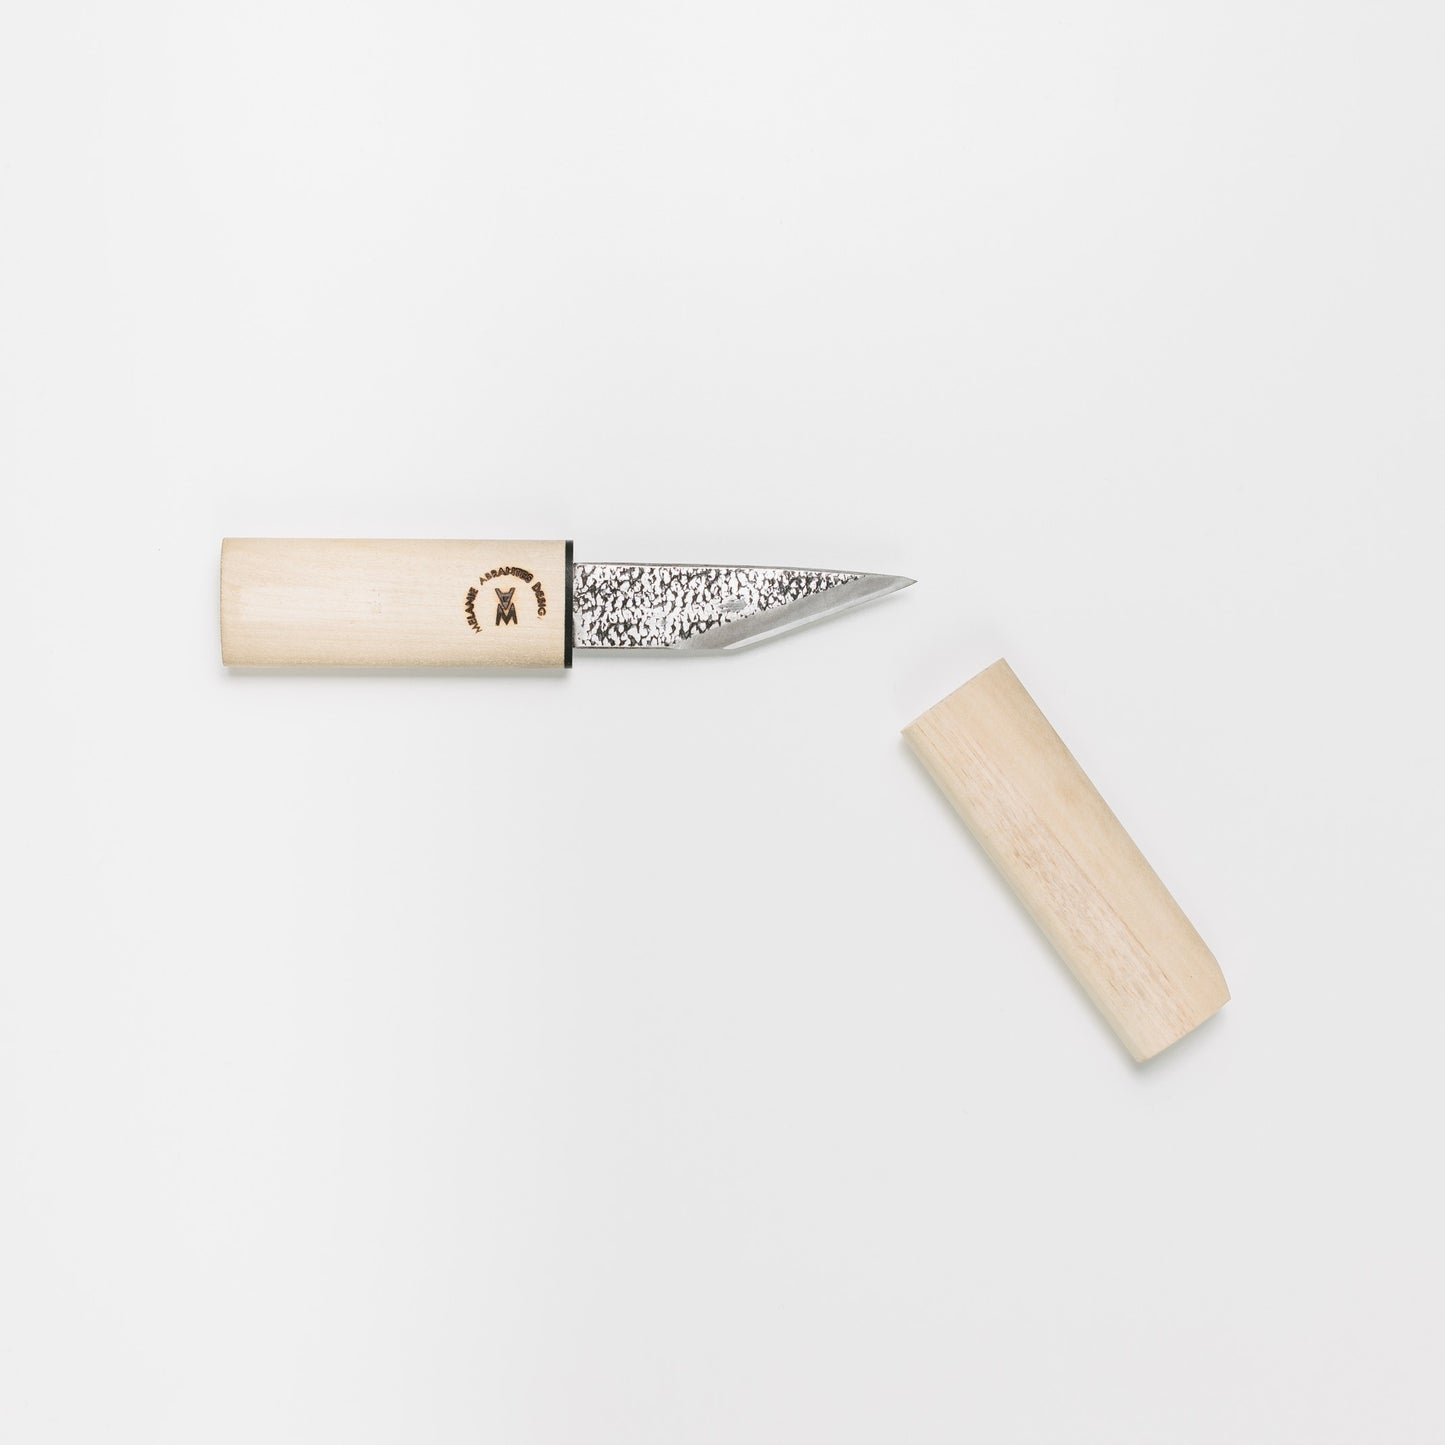 Carving knife shown with the cover off, exposing the blade. Depicted is the beveled edge on one side to give an extremely fine cut.